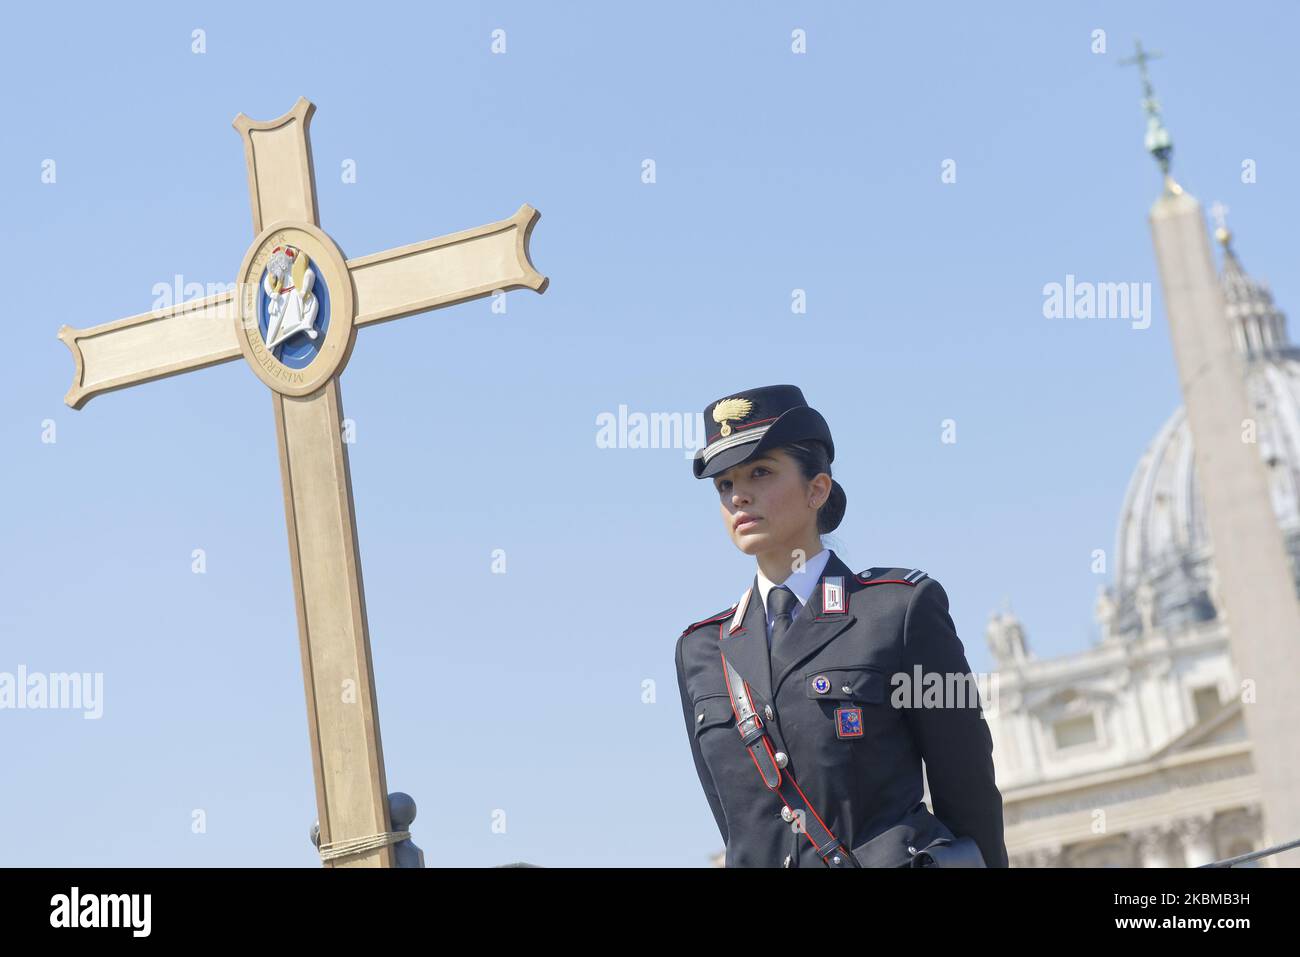 Italian Carabinieri stand inside an empty St. Peter's Square at the Vatican while Pope Francis celebrated an Easter Mass inside St. Peter's Basilica, Sunday, April 12, 2020. Pope Francis and Christians around the world marked a solitary Easter Sunday, forced to celebrate the most joyful day in the liturgical calendar amid the sorrowful reminders of the devastation wrought by the coronavirus pandemic. (Photo by Massimo Valicchia/NurPhoto) Stock Photo